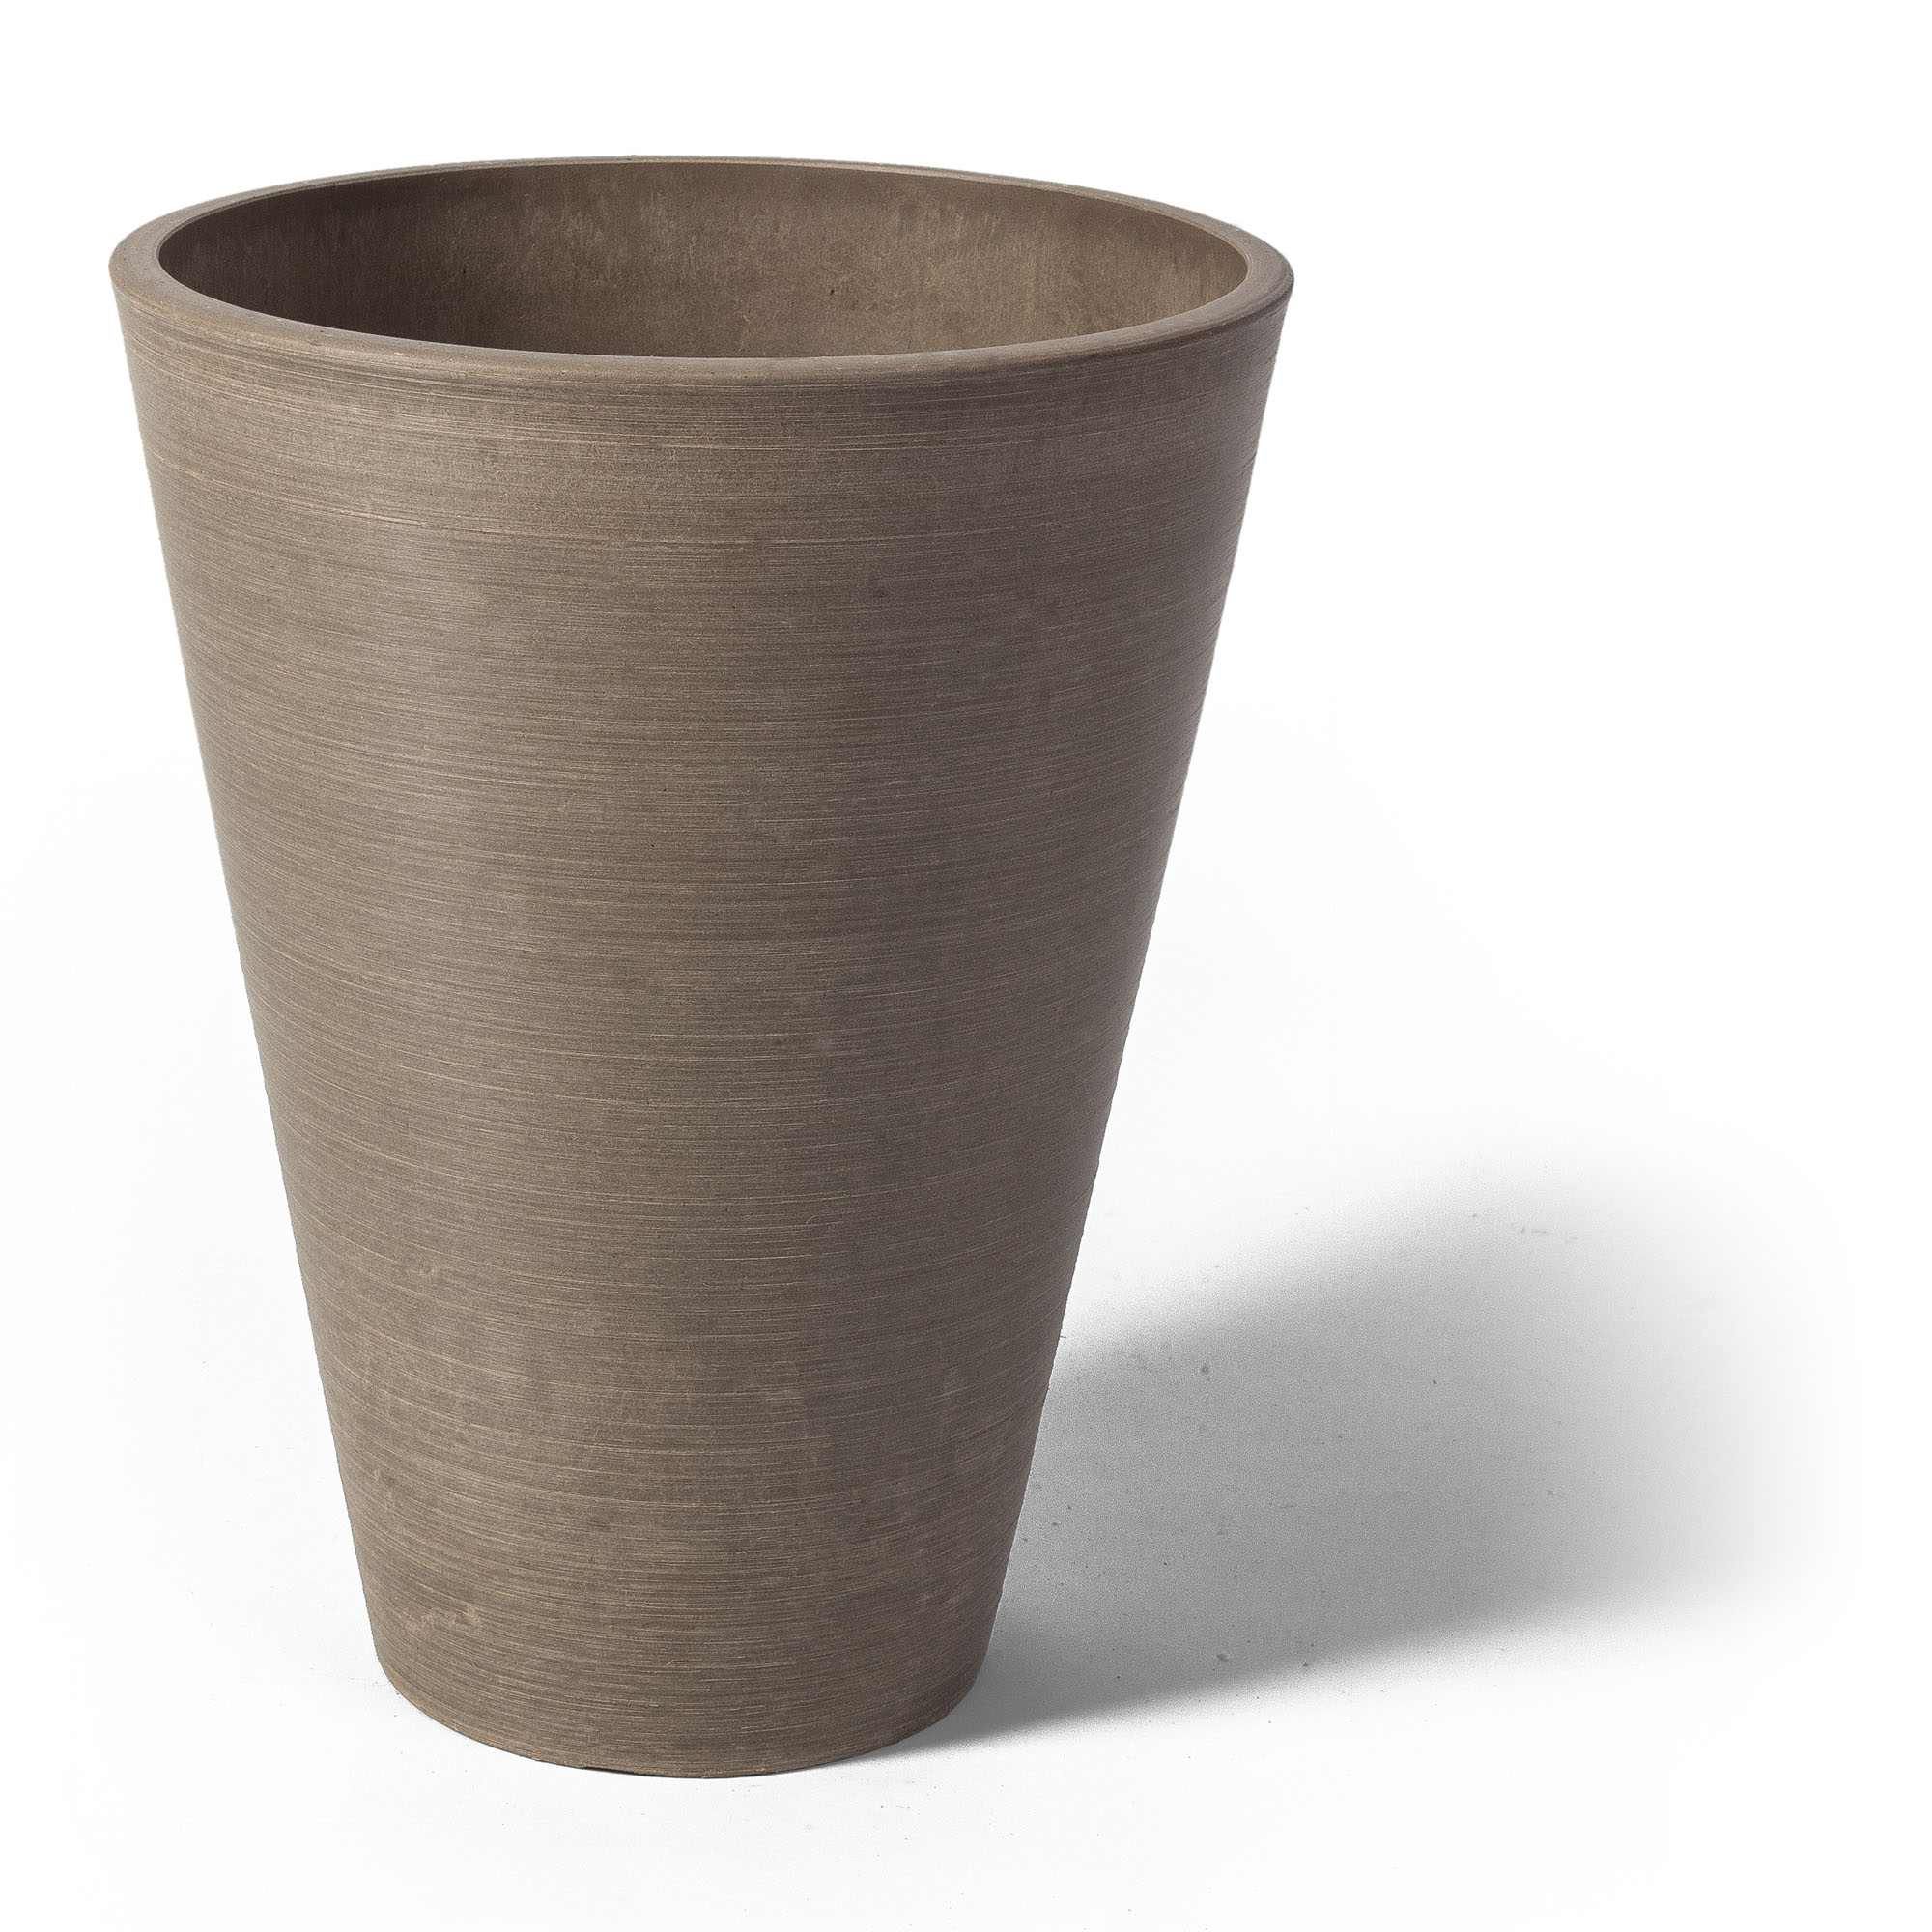 Algreen Products Valencia Round 16.25D x 23.75 Textured Planter